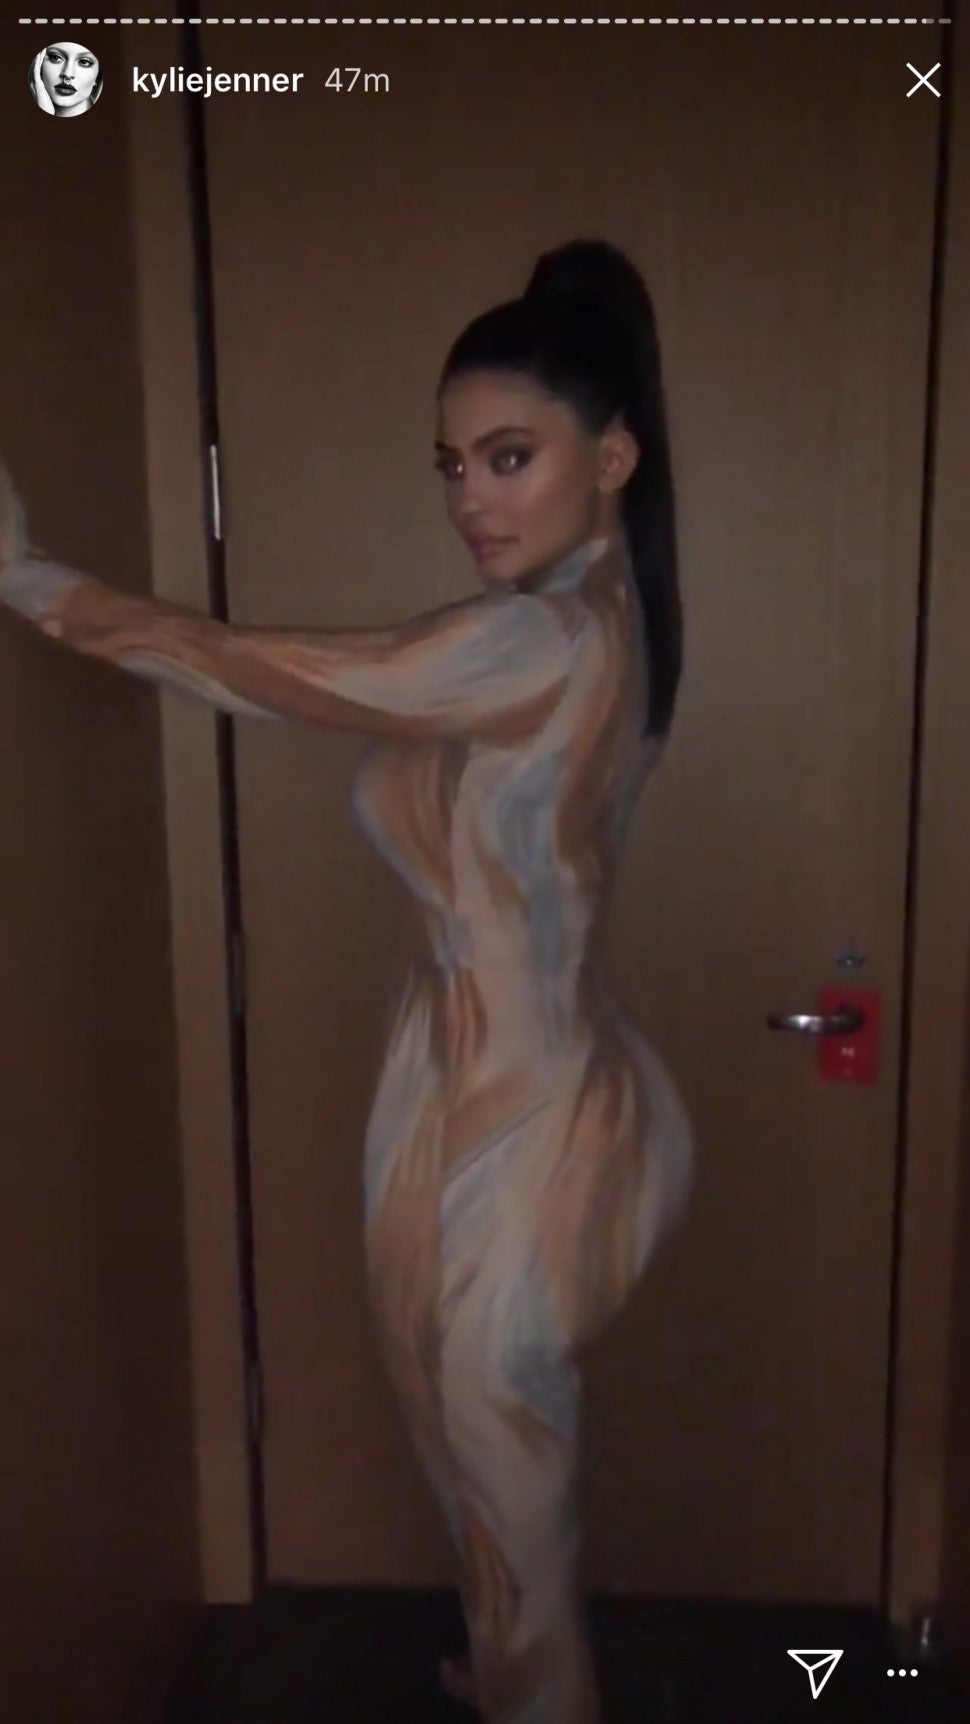 Kylie Jenner shows off dress in NYC